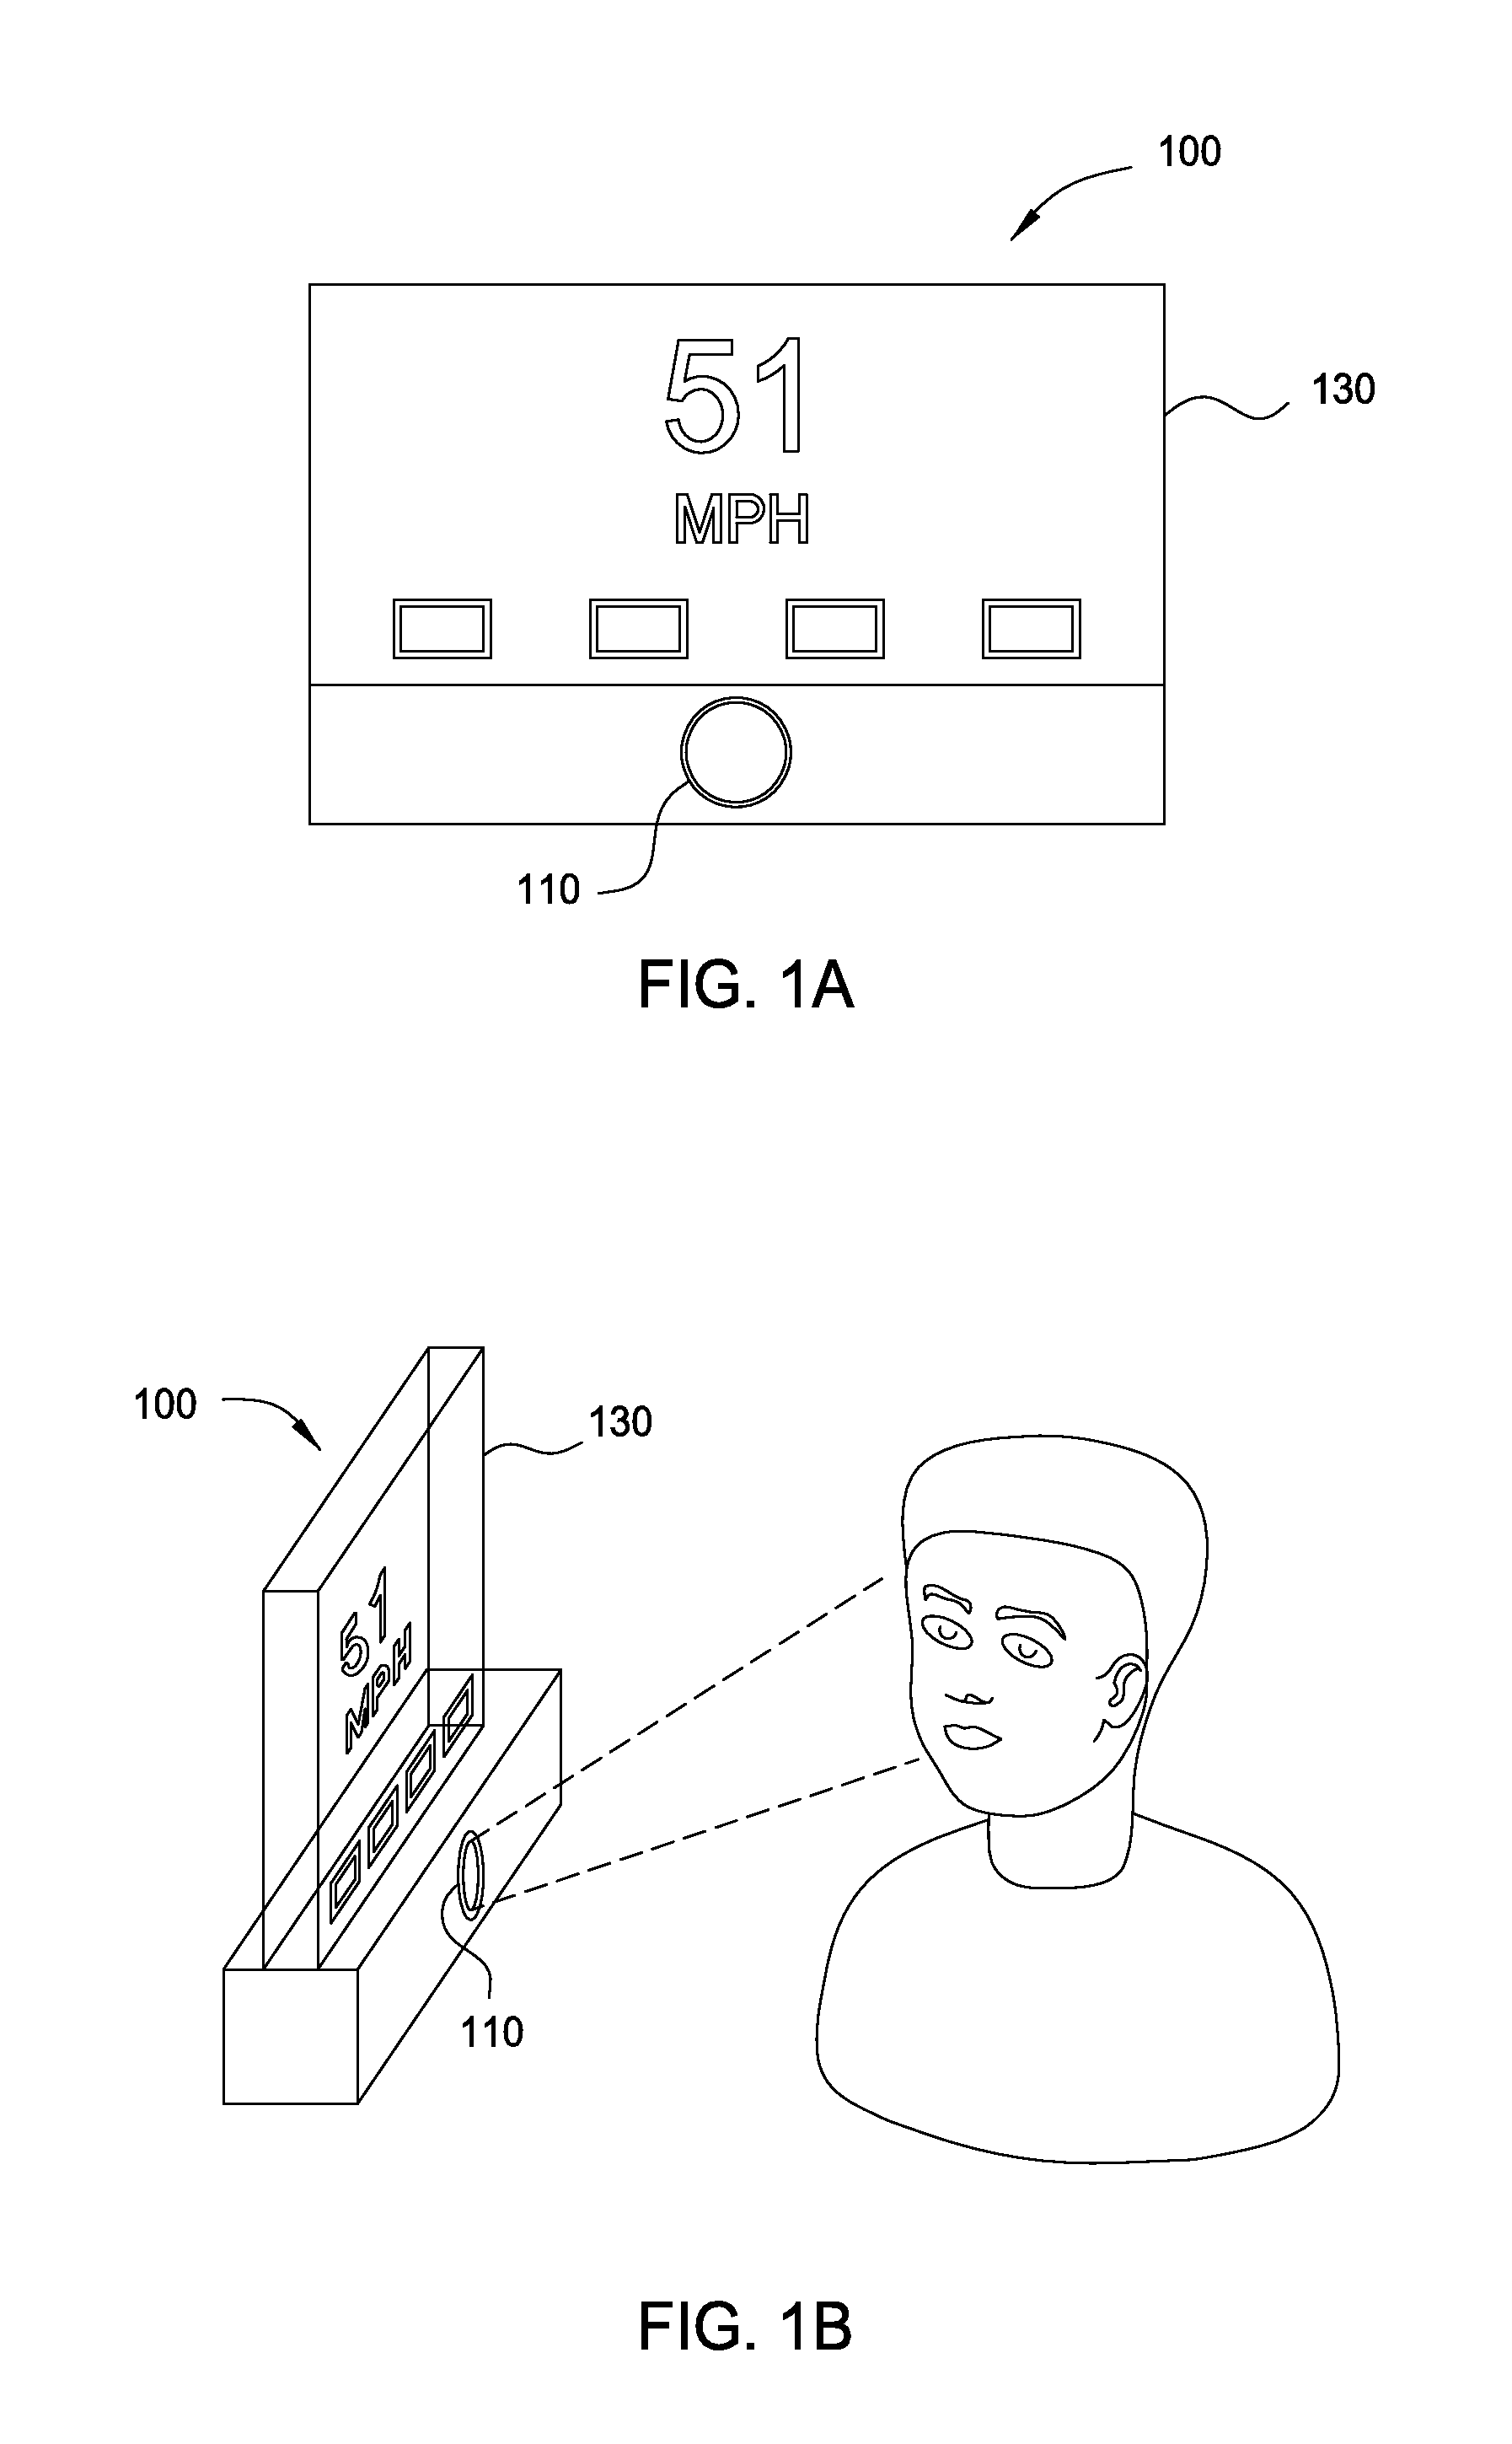 Eye vergence detection on a display